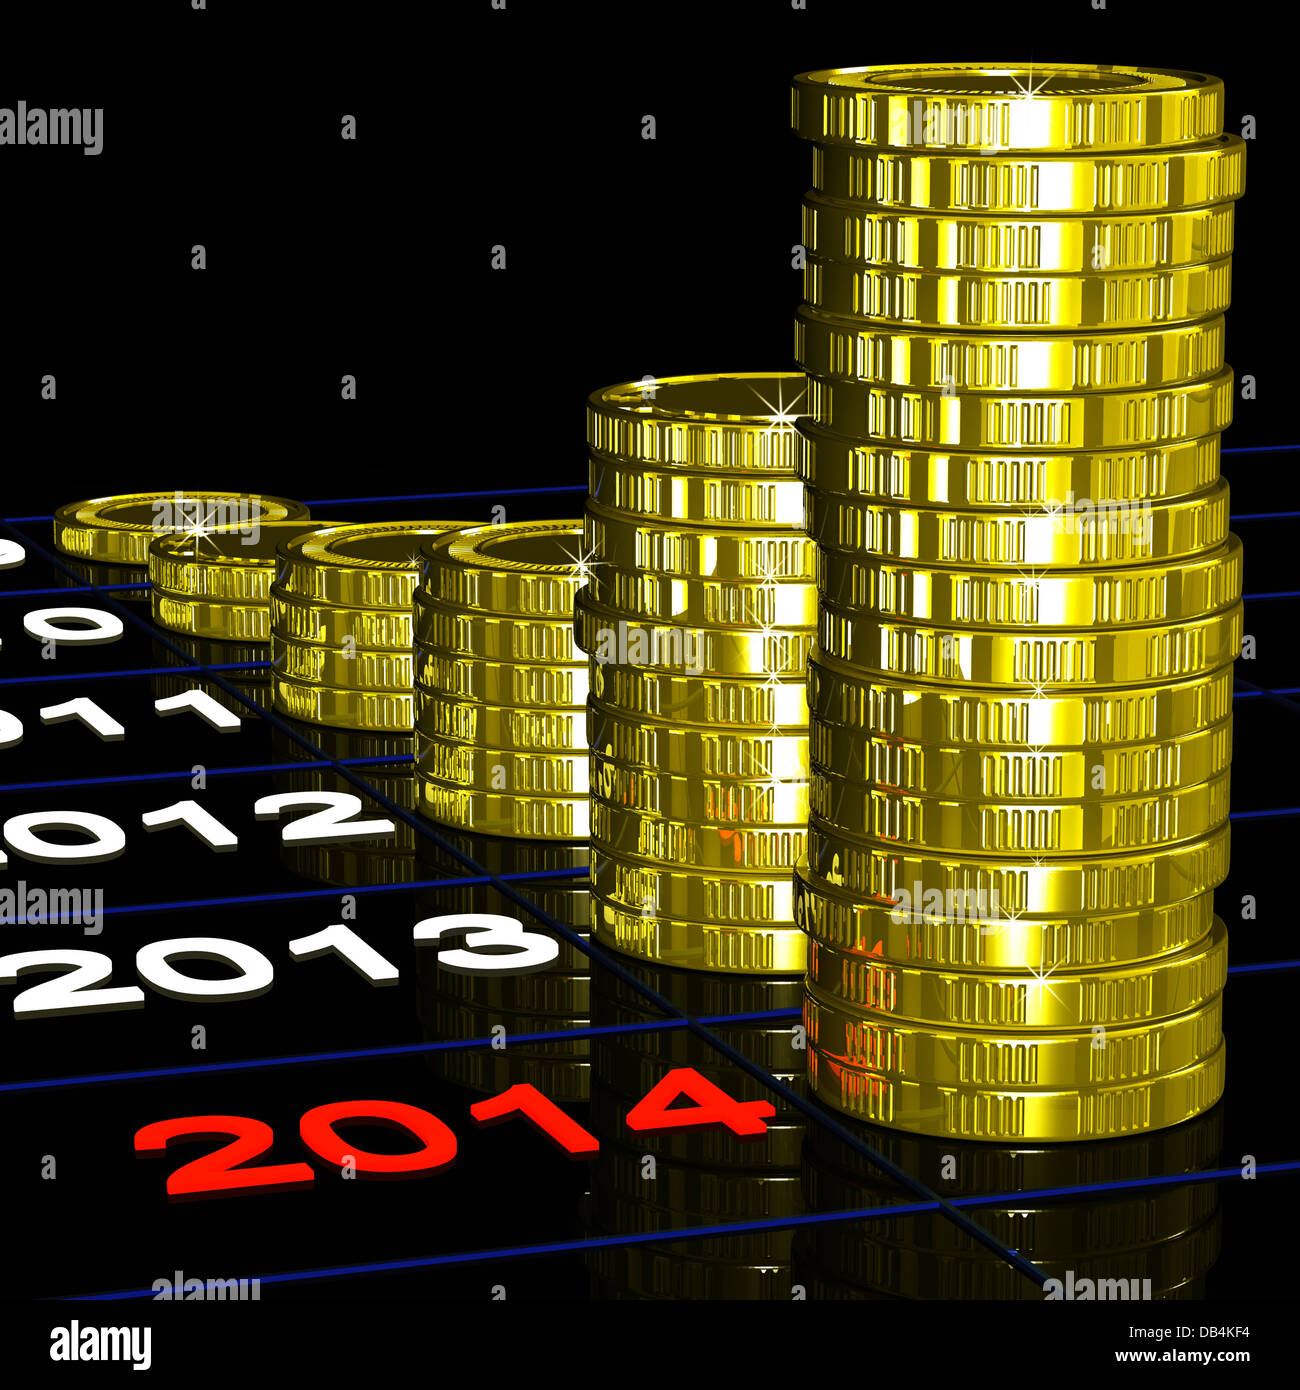 Coins On 2014 Shows Financial Expectations Stock Photo